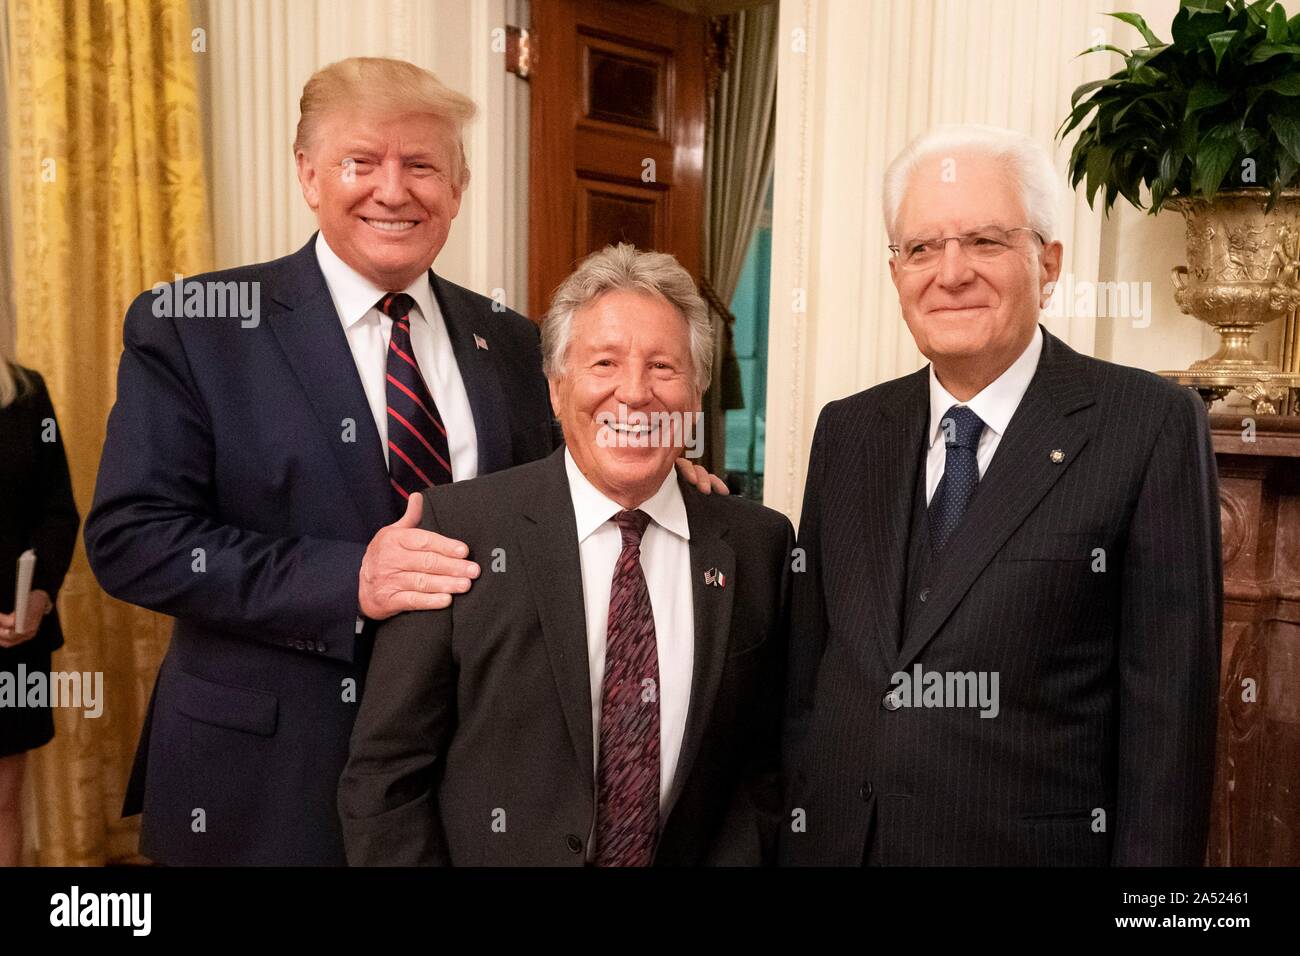 Washington, United States of America. 16 October, 2019. U.S President Donald Trump, left, poses with legendary race car driver Mario Andretti and Italian President Sergio Mattarella, right, during a reception in the East Room of the White House October 16, 2019 in Washington, DC. Credit: Tia Dufour/White House Photo/Alamy Live News Stock Photo